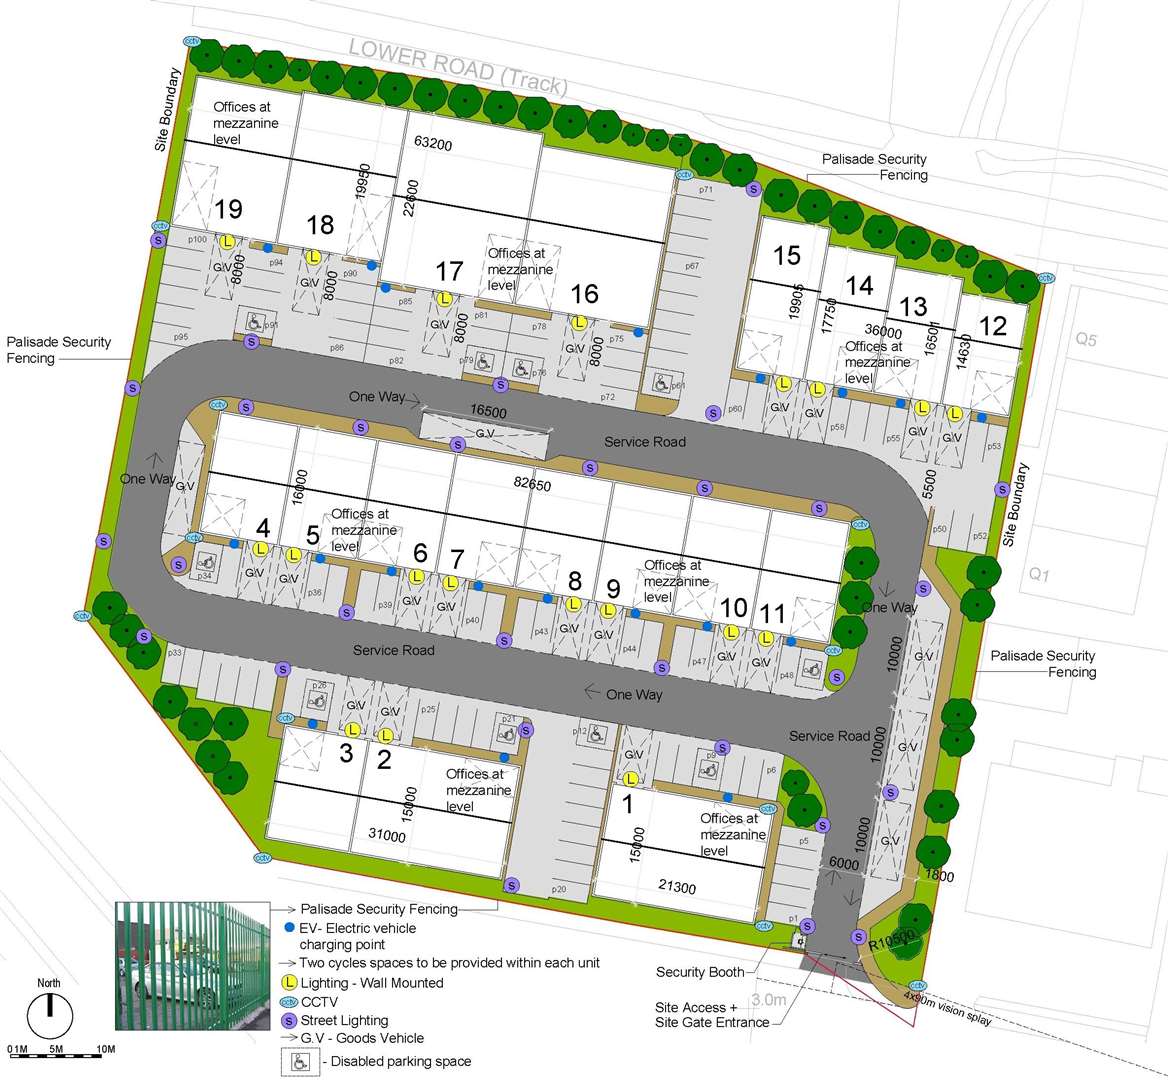 The plans for the Rod End Estate in Northfleet